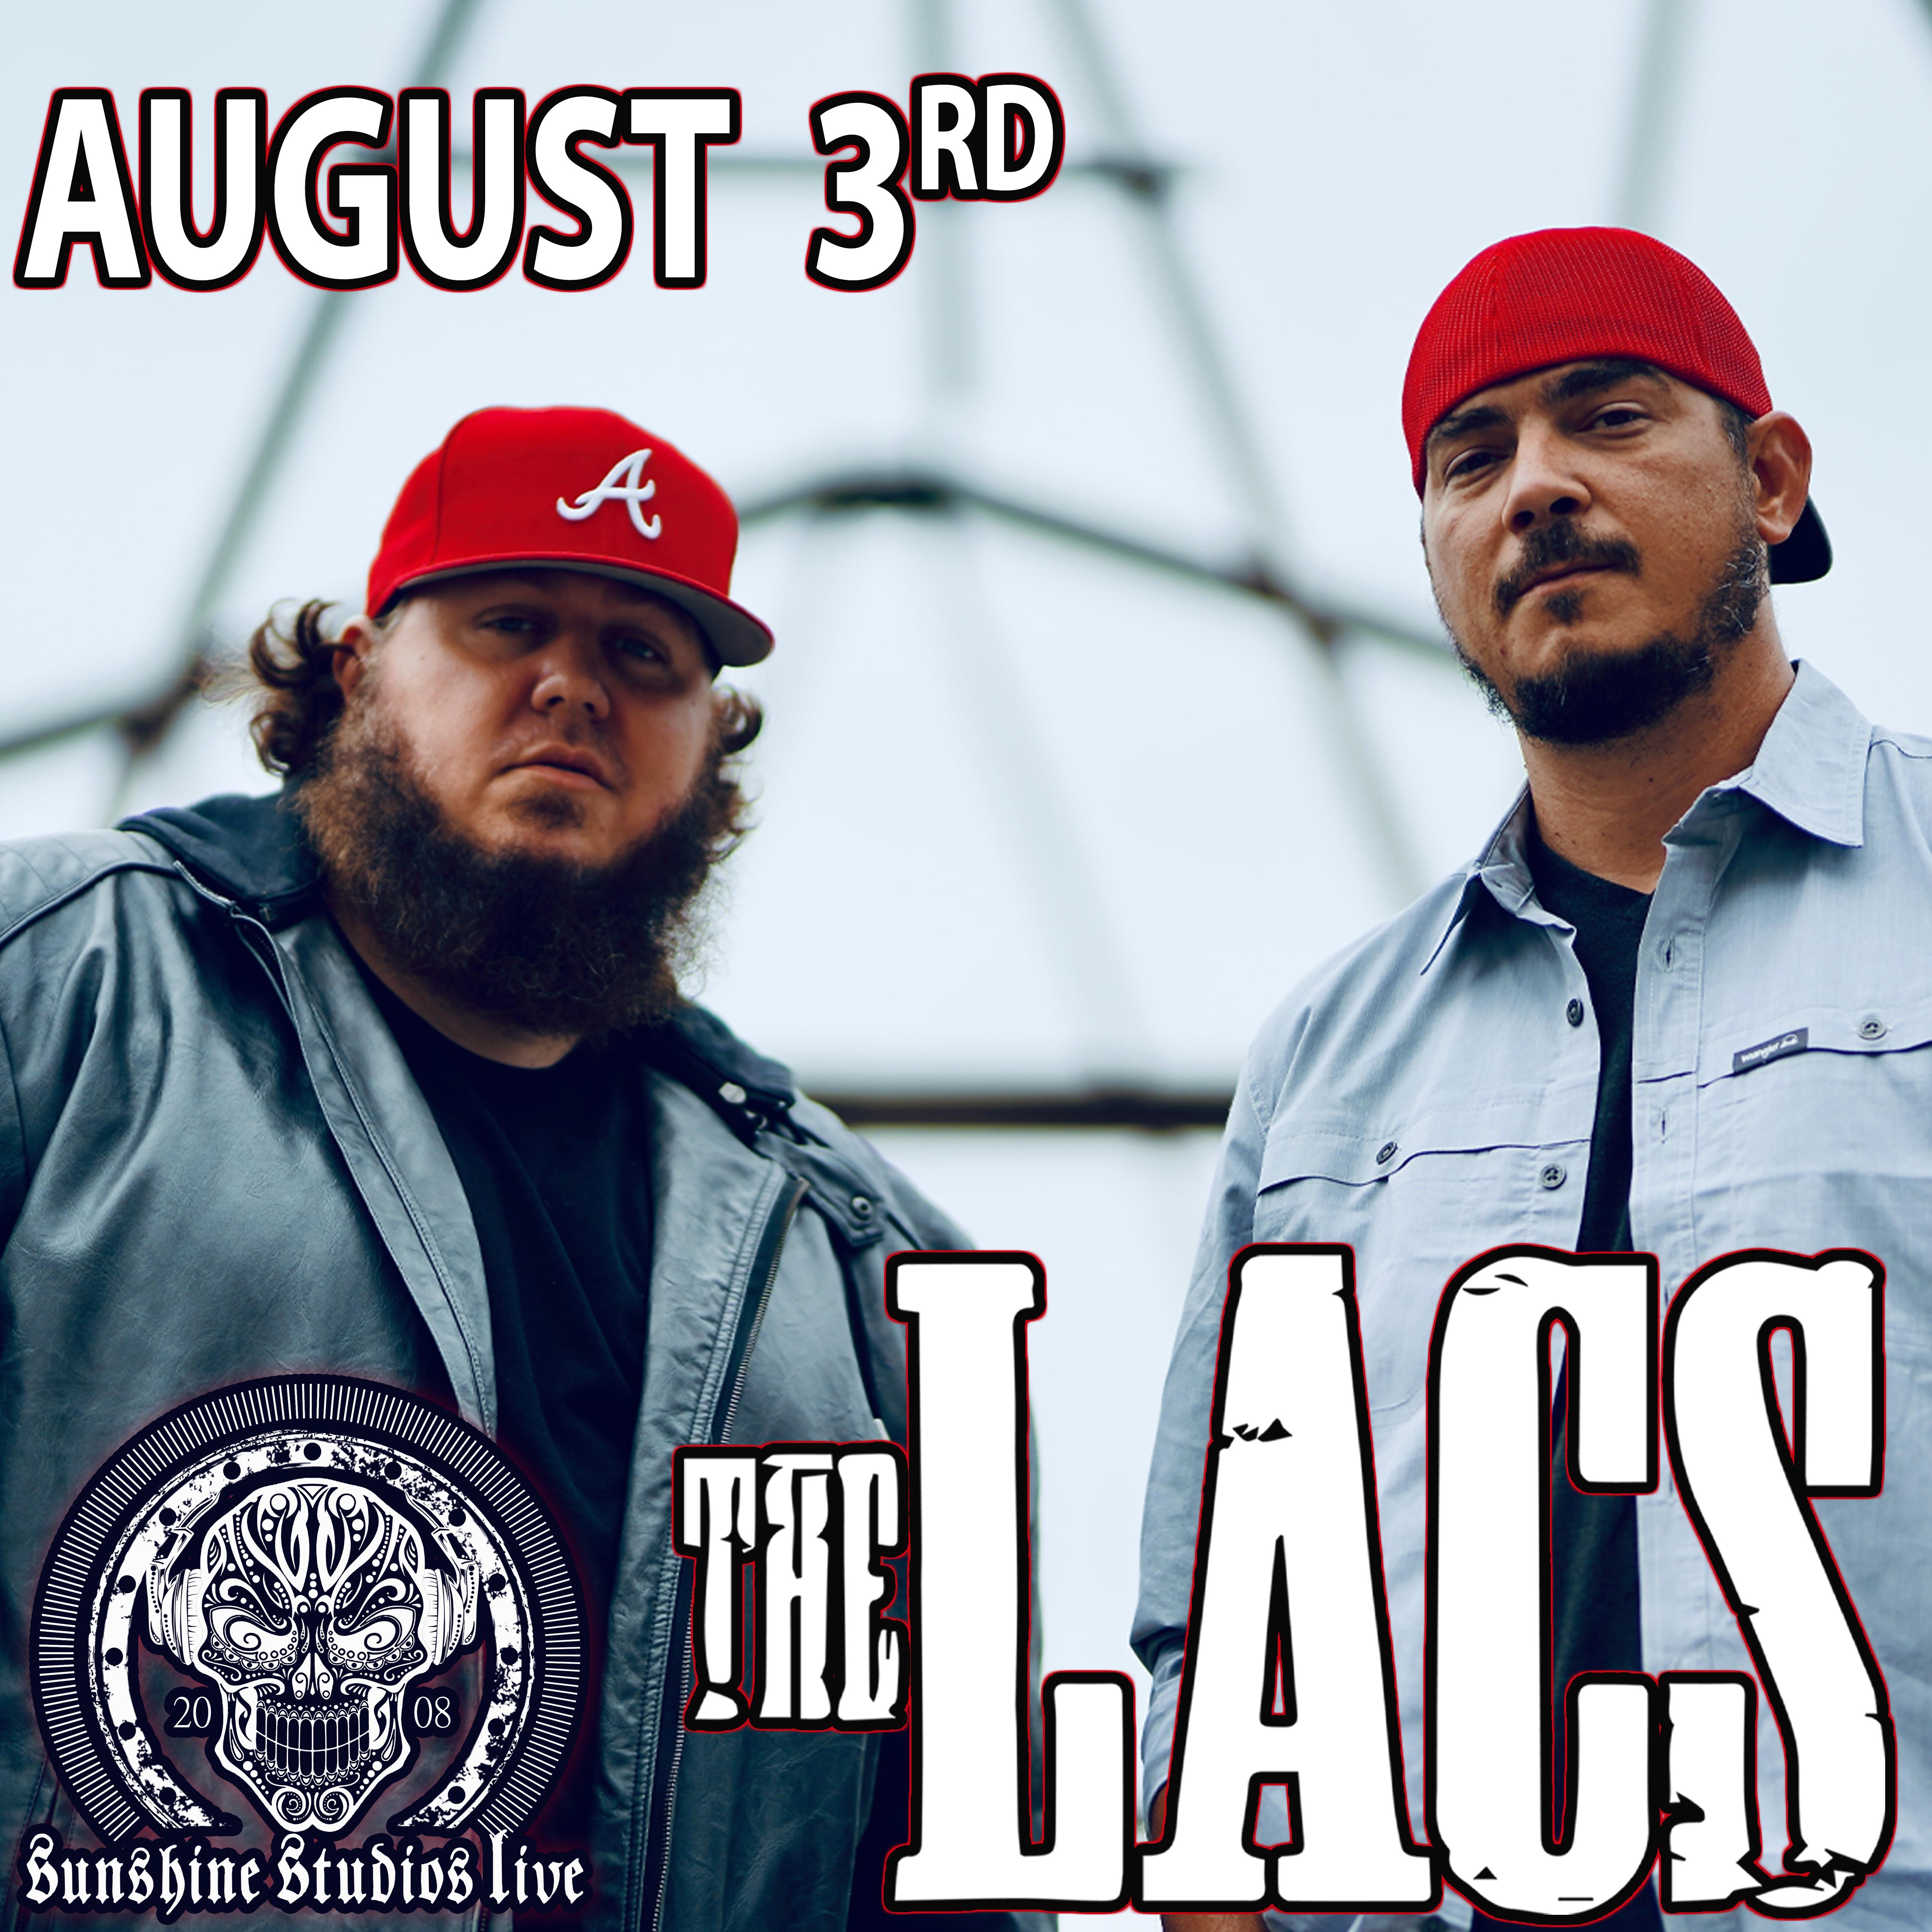 Buy Tickets to The Lacs in Colorado Springs on Aug 03, 2022